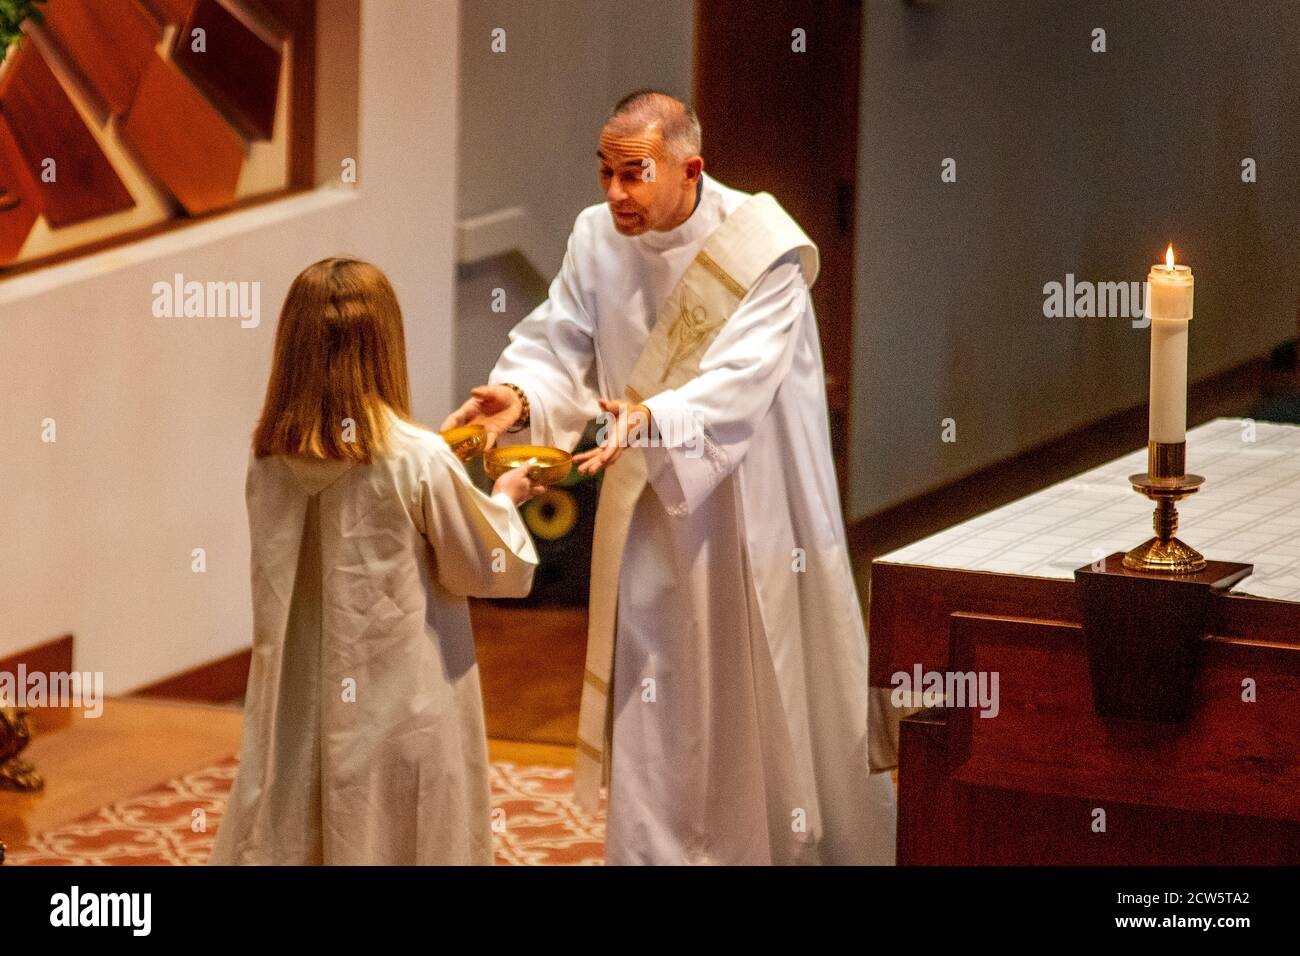 A robed deacon receives bowls of holy water from a female assistant while participating in mass at the altar of a Southern California Catholic church. Stock Photo